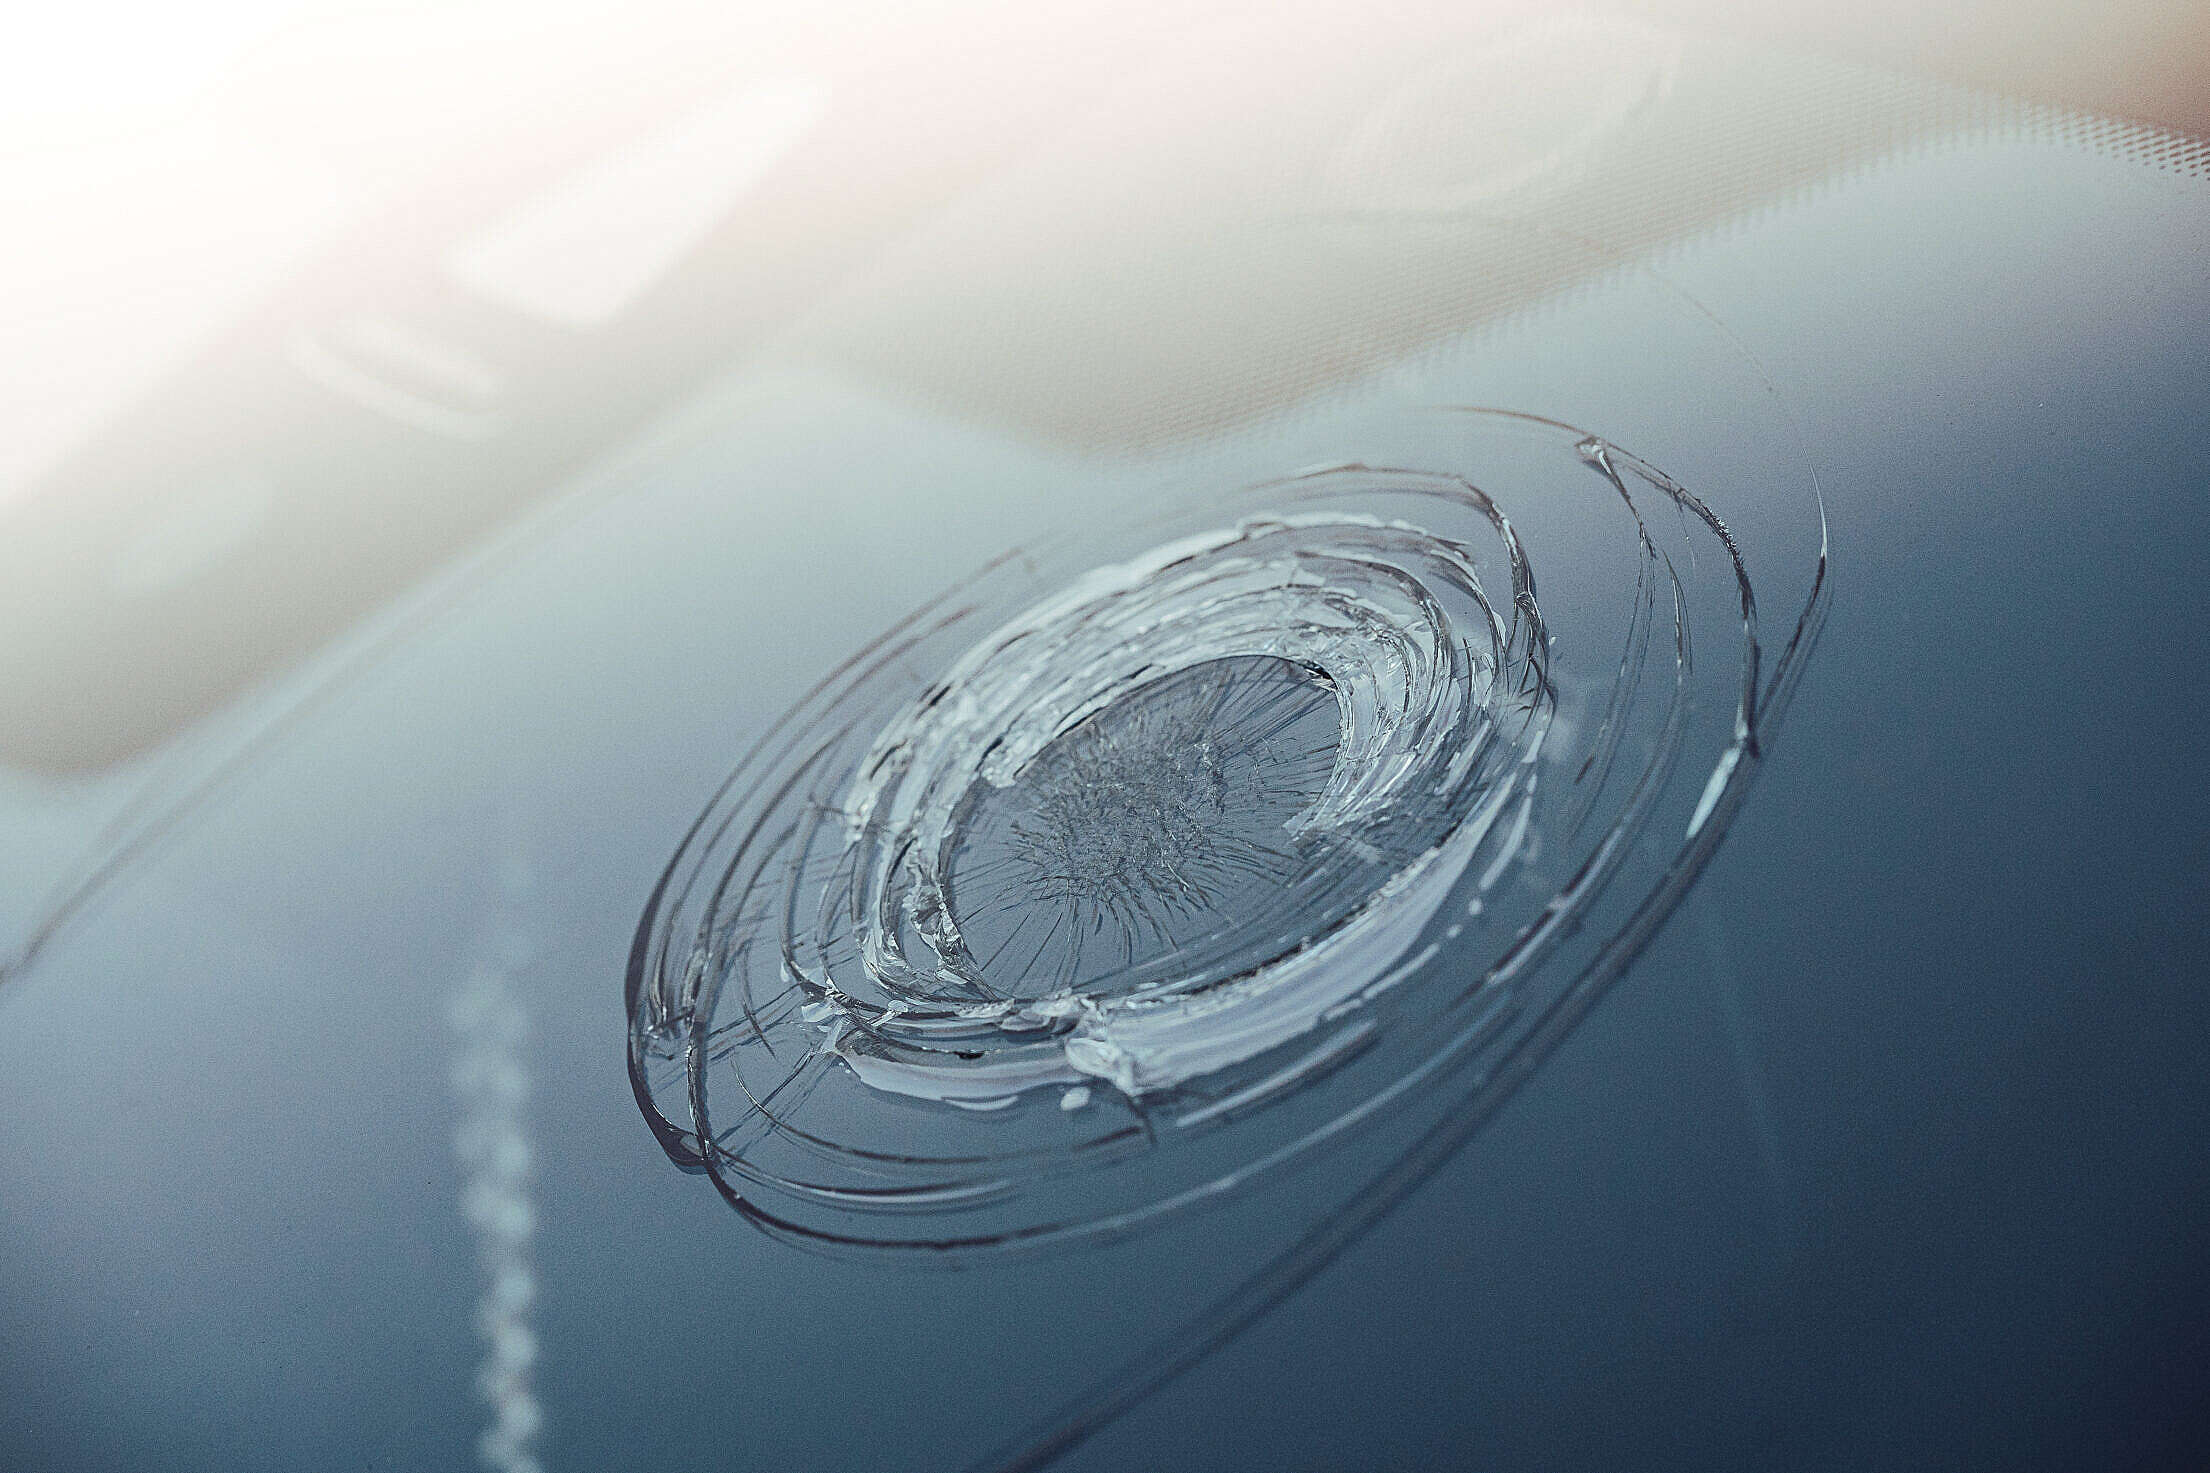 Broken Windshield from Giant Hail Free Stock Photo